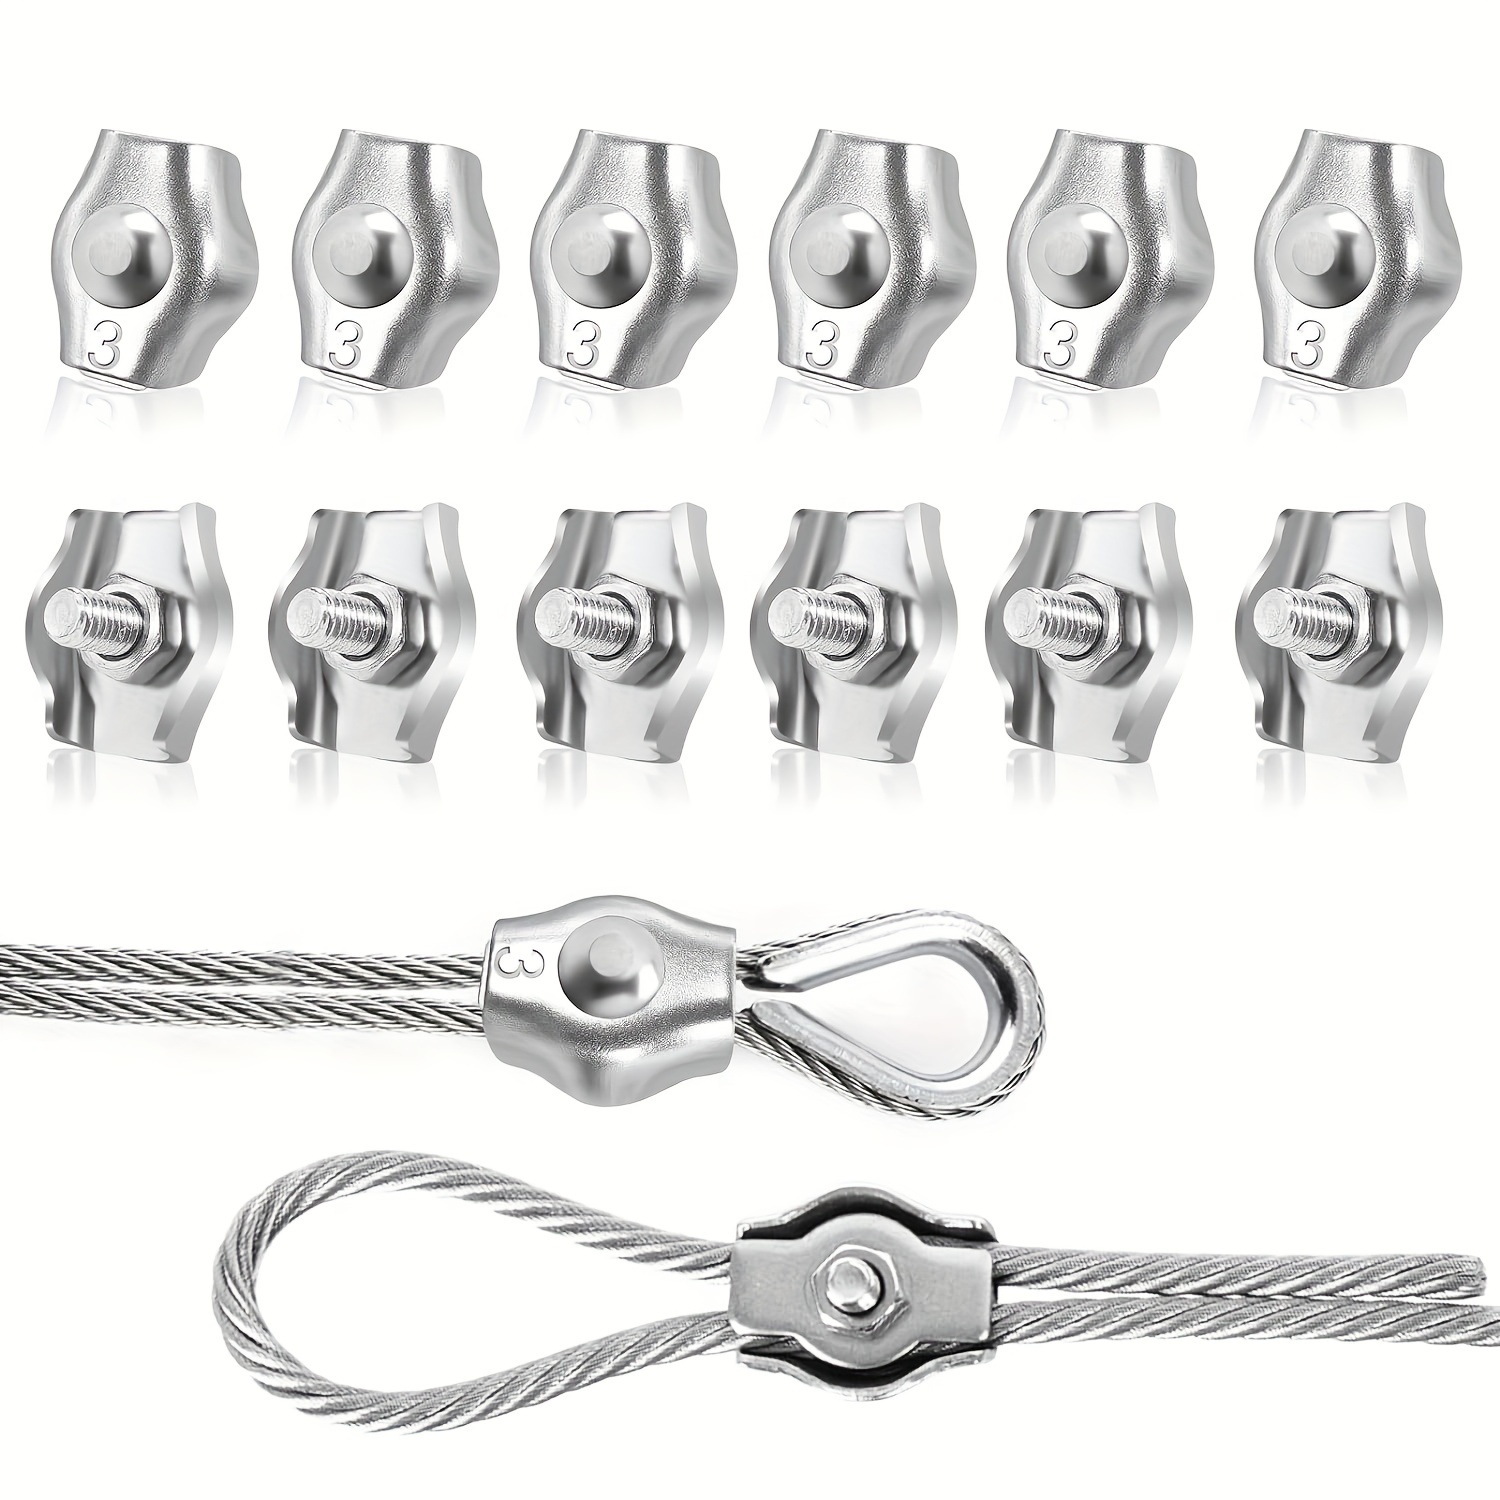 Cord Fasteners: Metal Clamps: Fastening Craft Cords or Lanyard Straps 